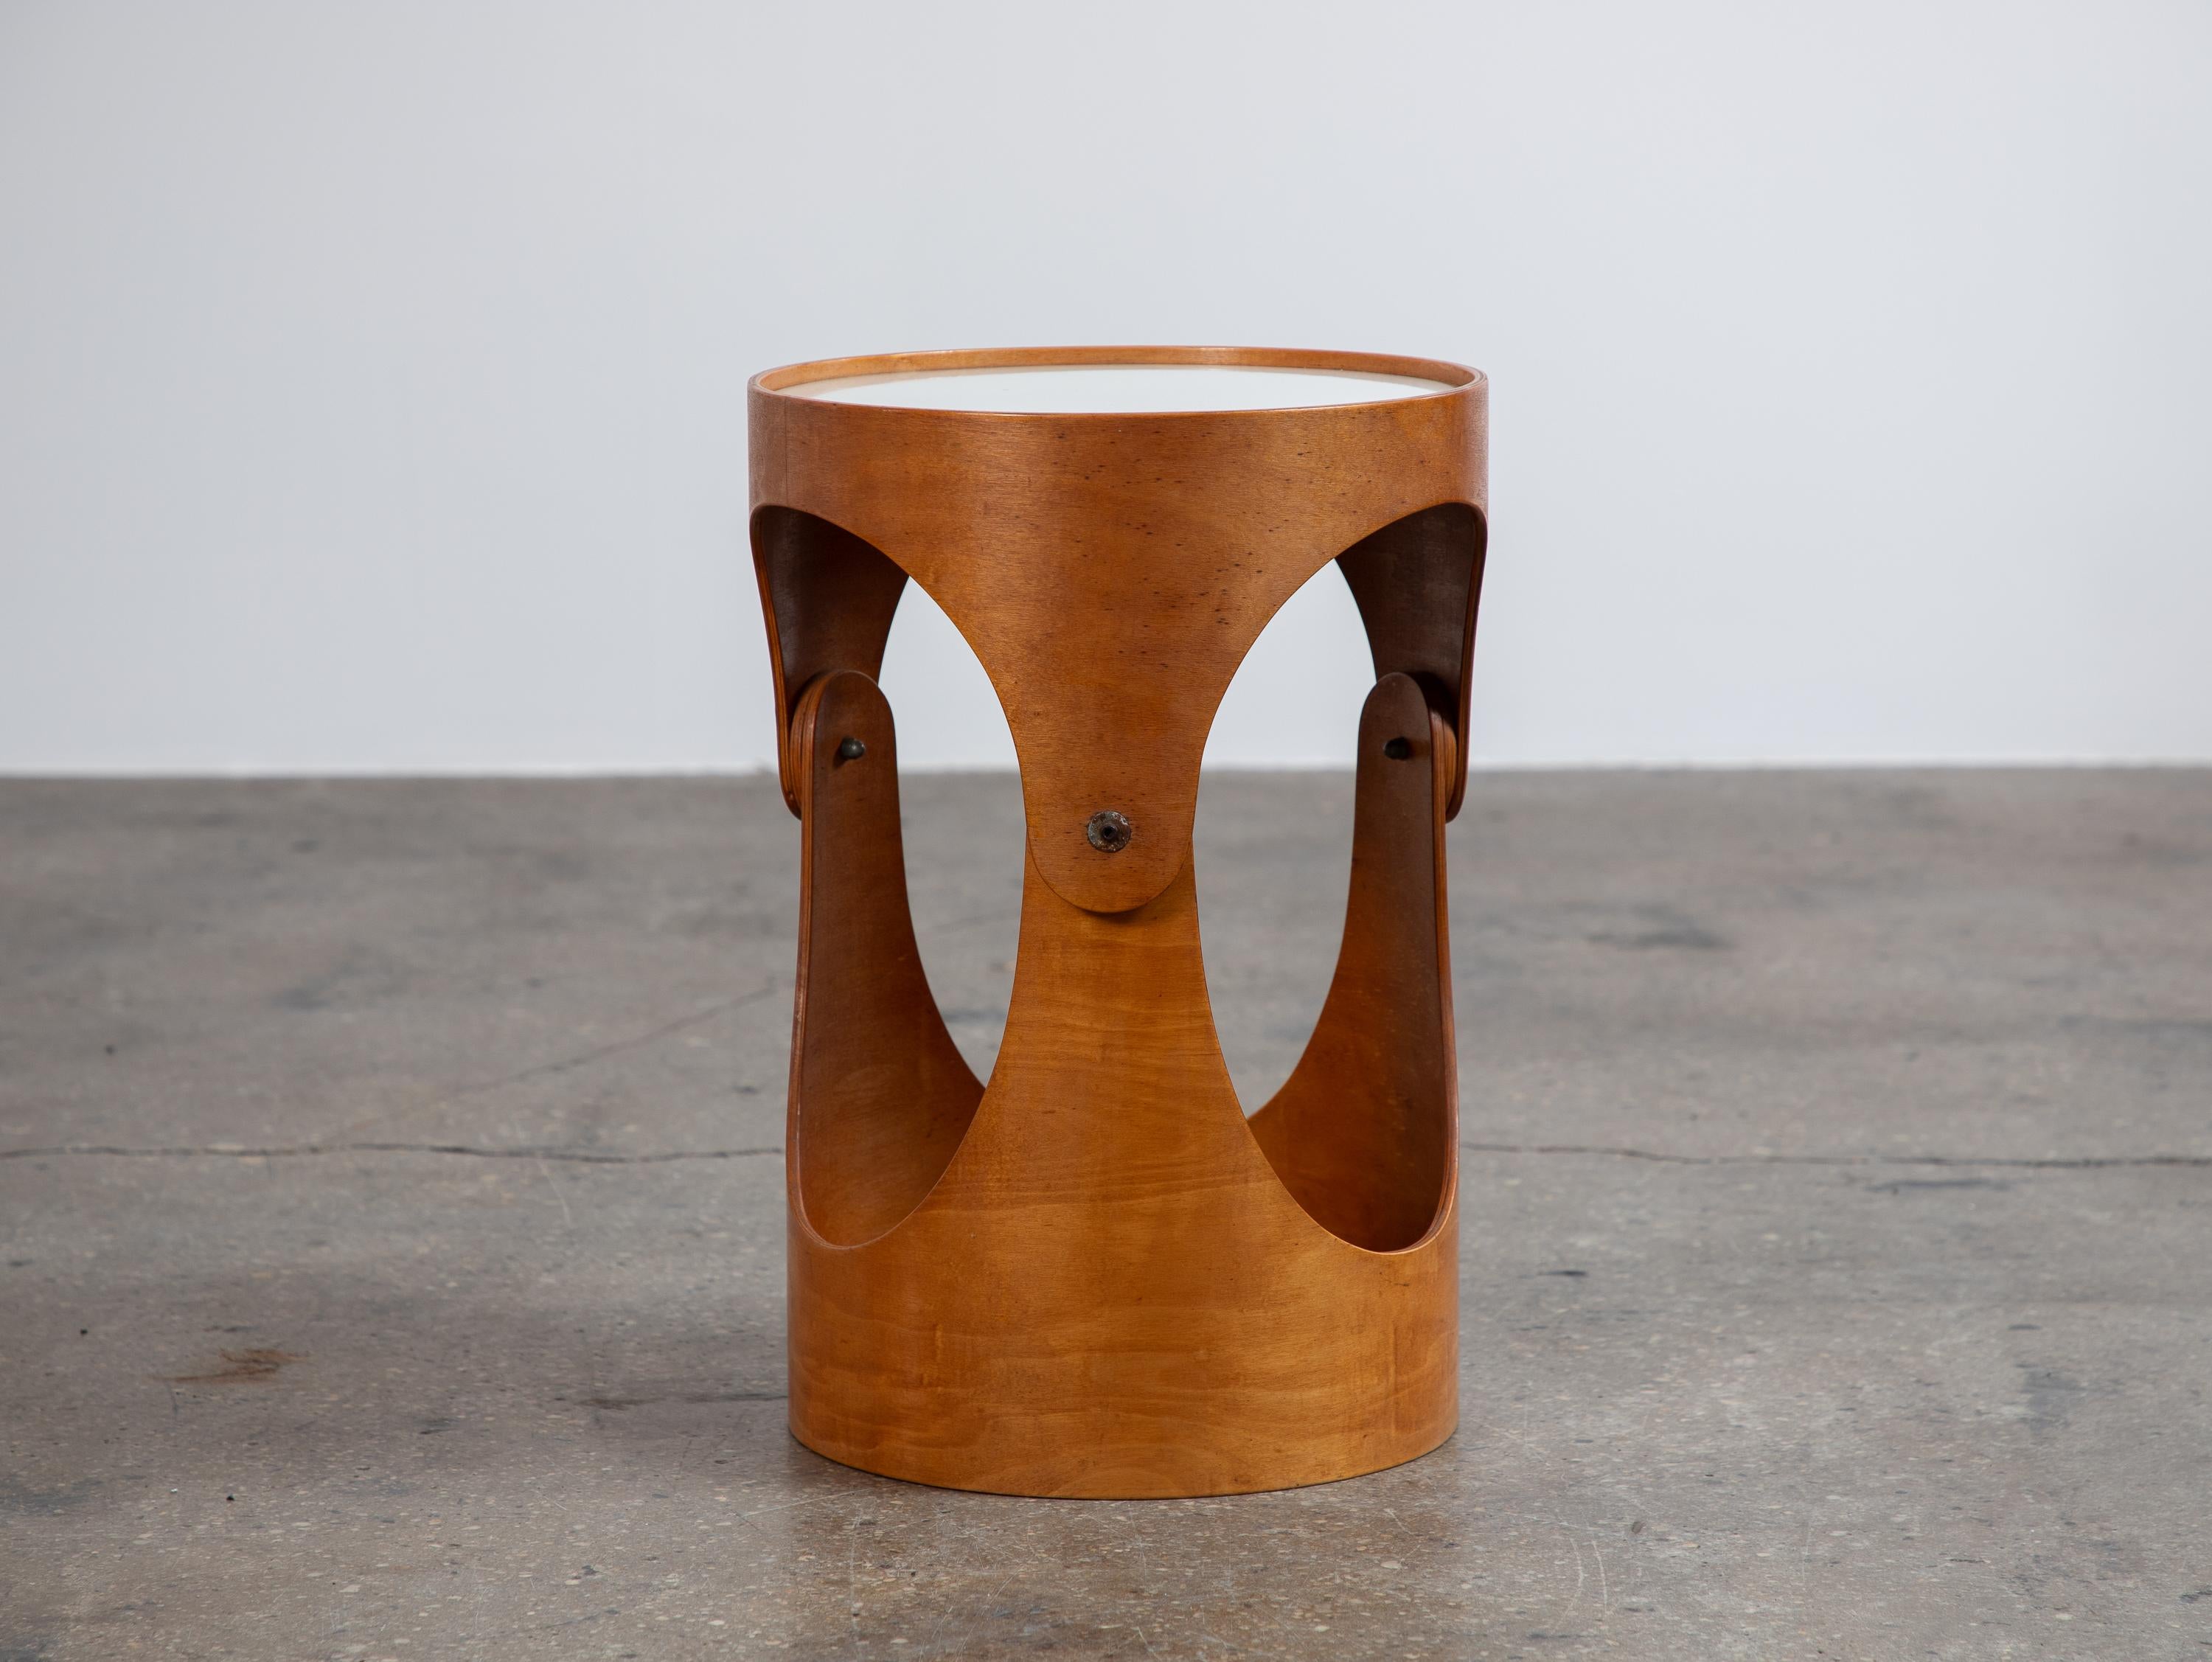 Modernist bent plywood occasional table, designed by architect Leandre Poisson. The table is comprised of a curved plywood base, fitted with an inset white laminate top. This example is one-of-a-kind, acquired alongside a suite of furniture